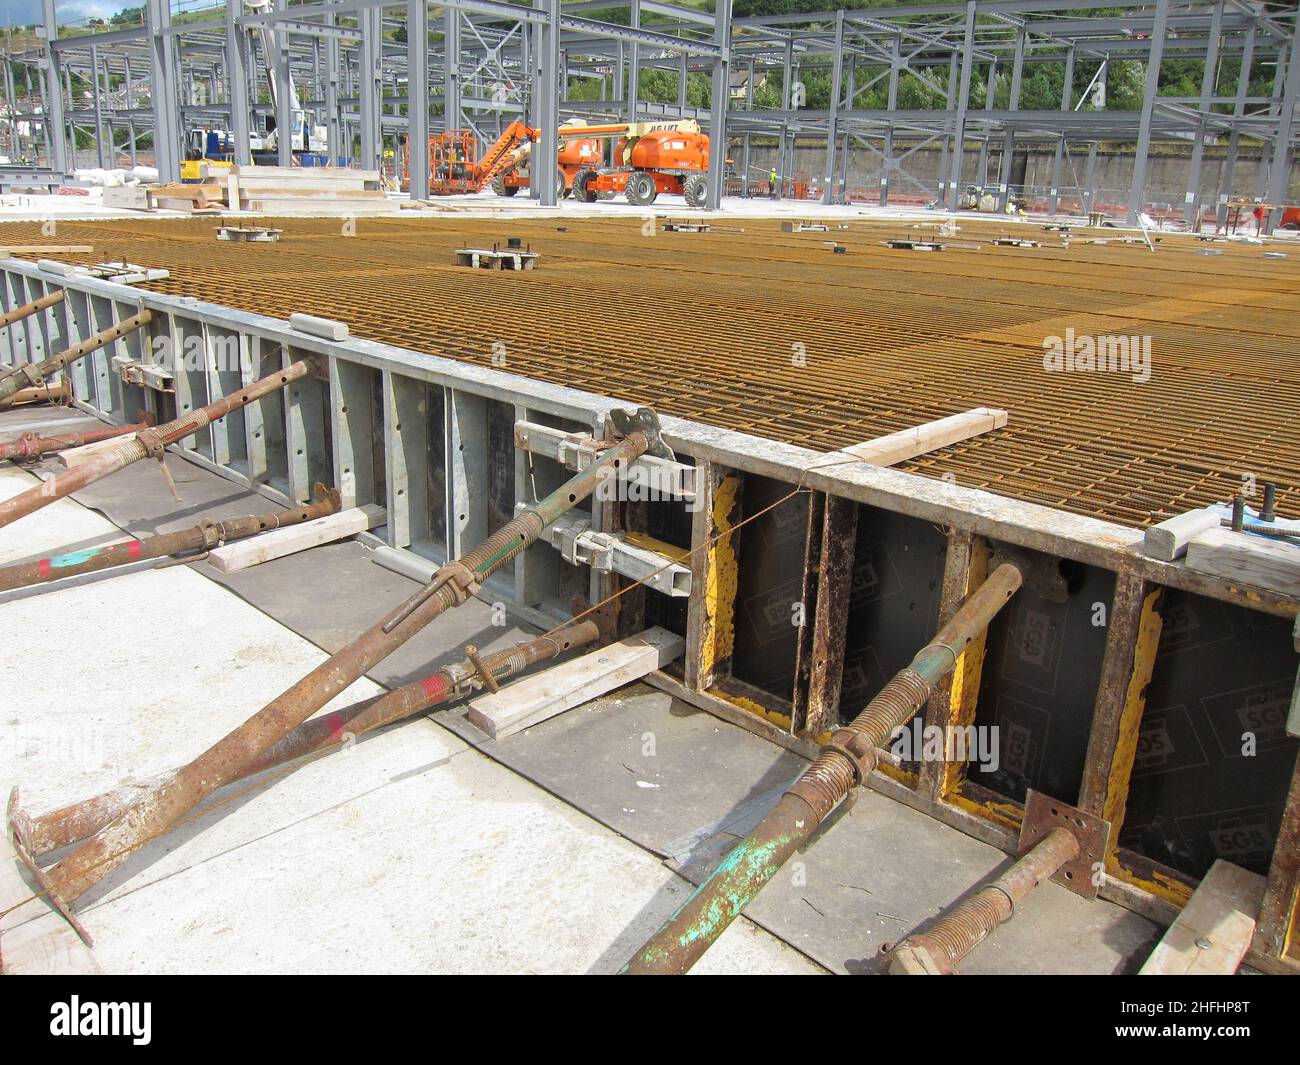 August 2011 - New concrete slab construction underway on a project in South Wales Stock Photo